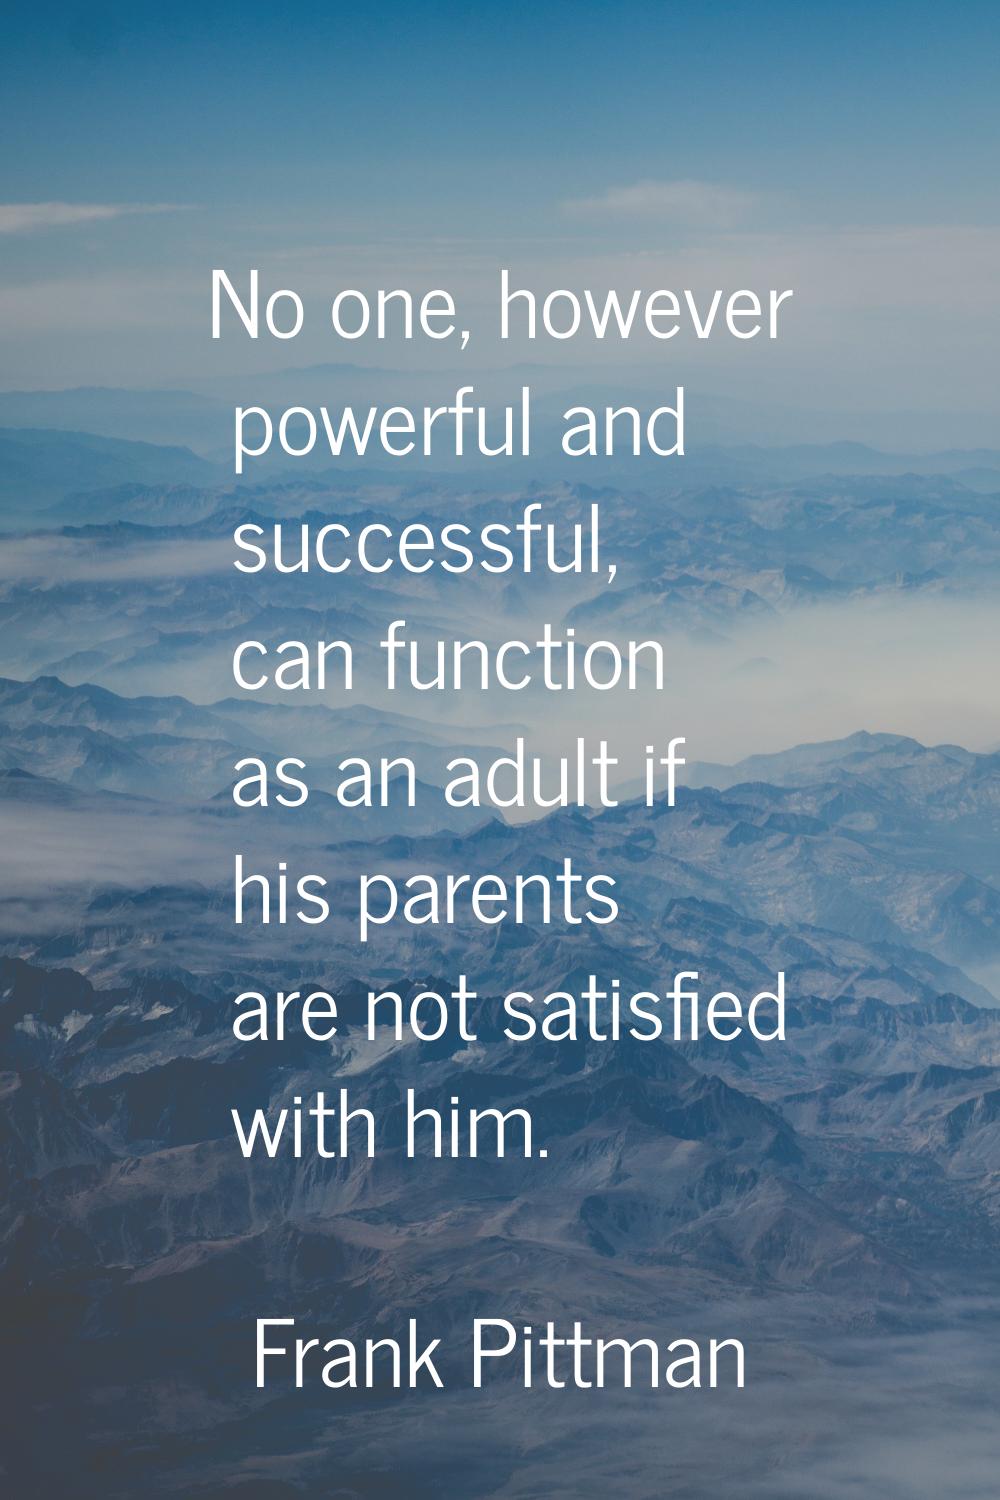 No one, however powerful and successful, can function as an adult if his parents are not satisfied 